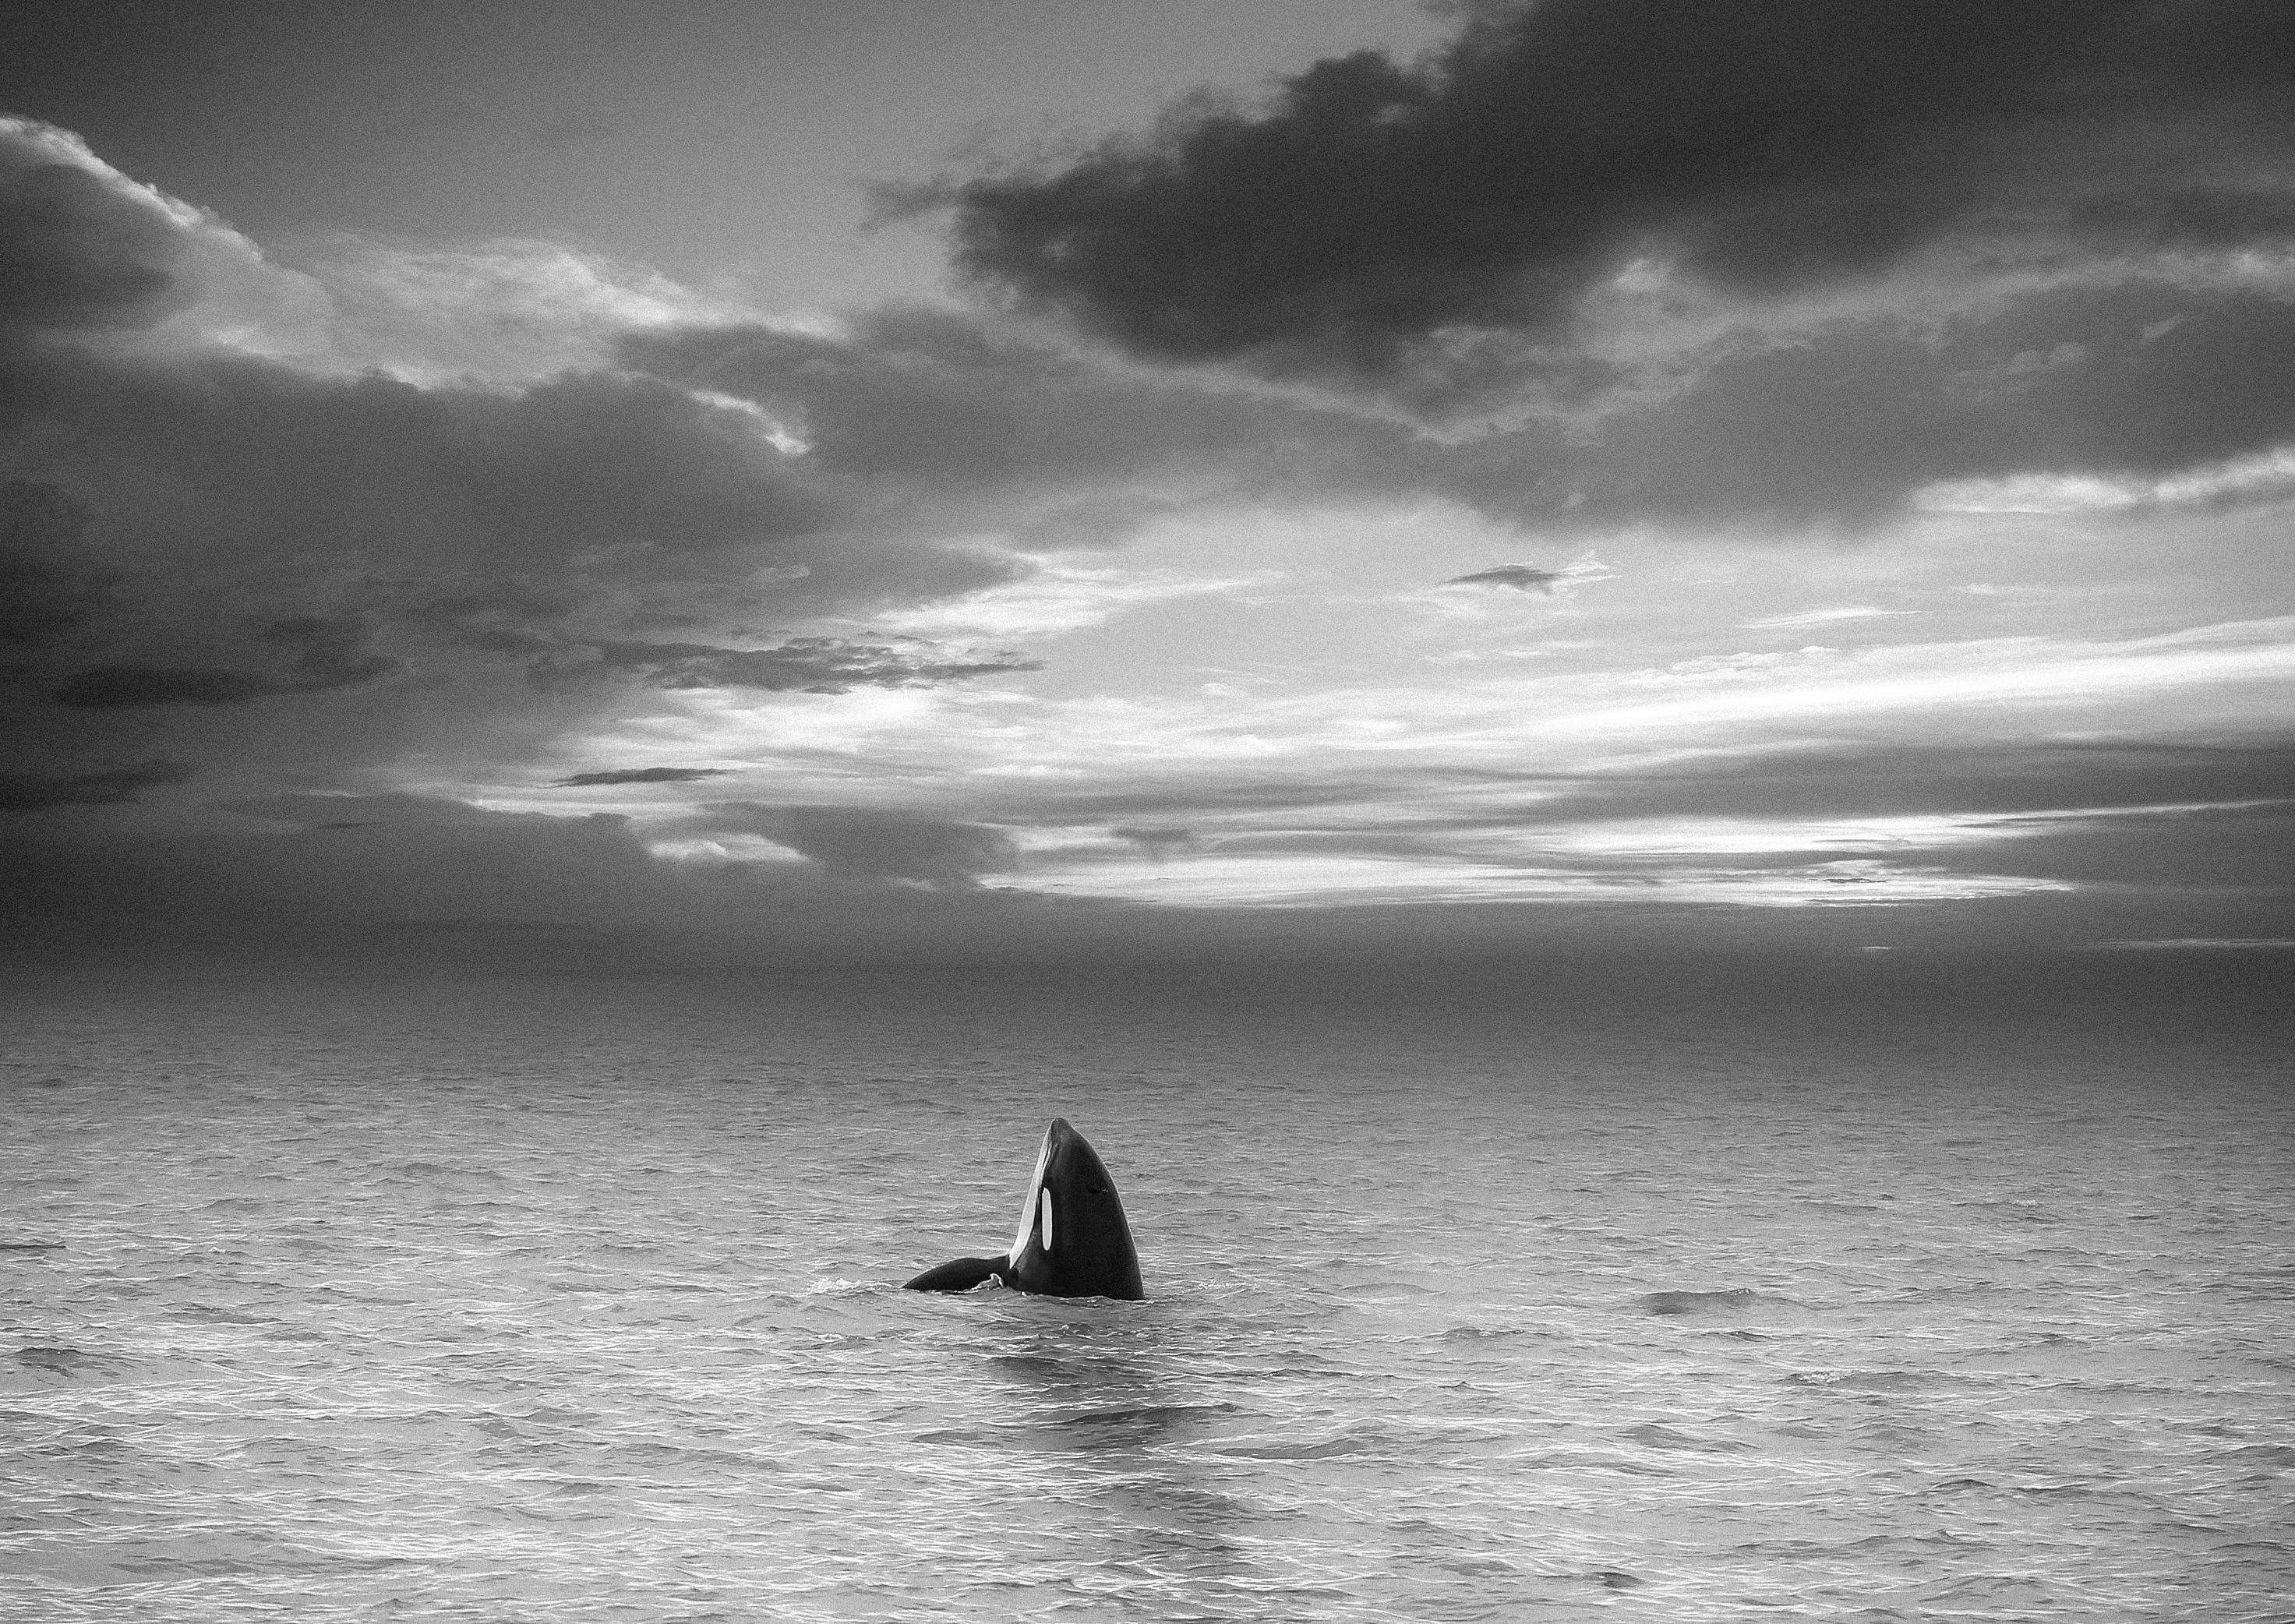 "36x48" Last Known Photograph of the Killer Whale "Granny" Photography